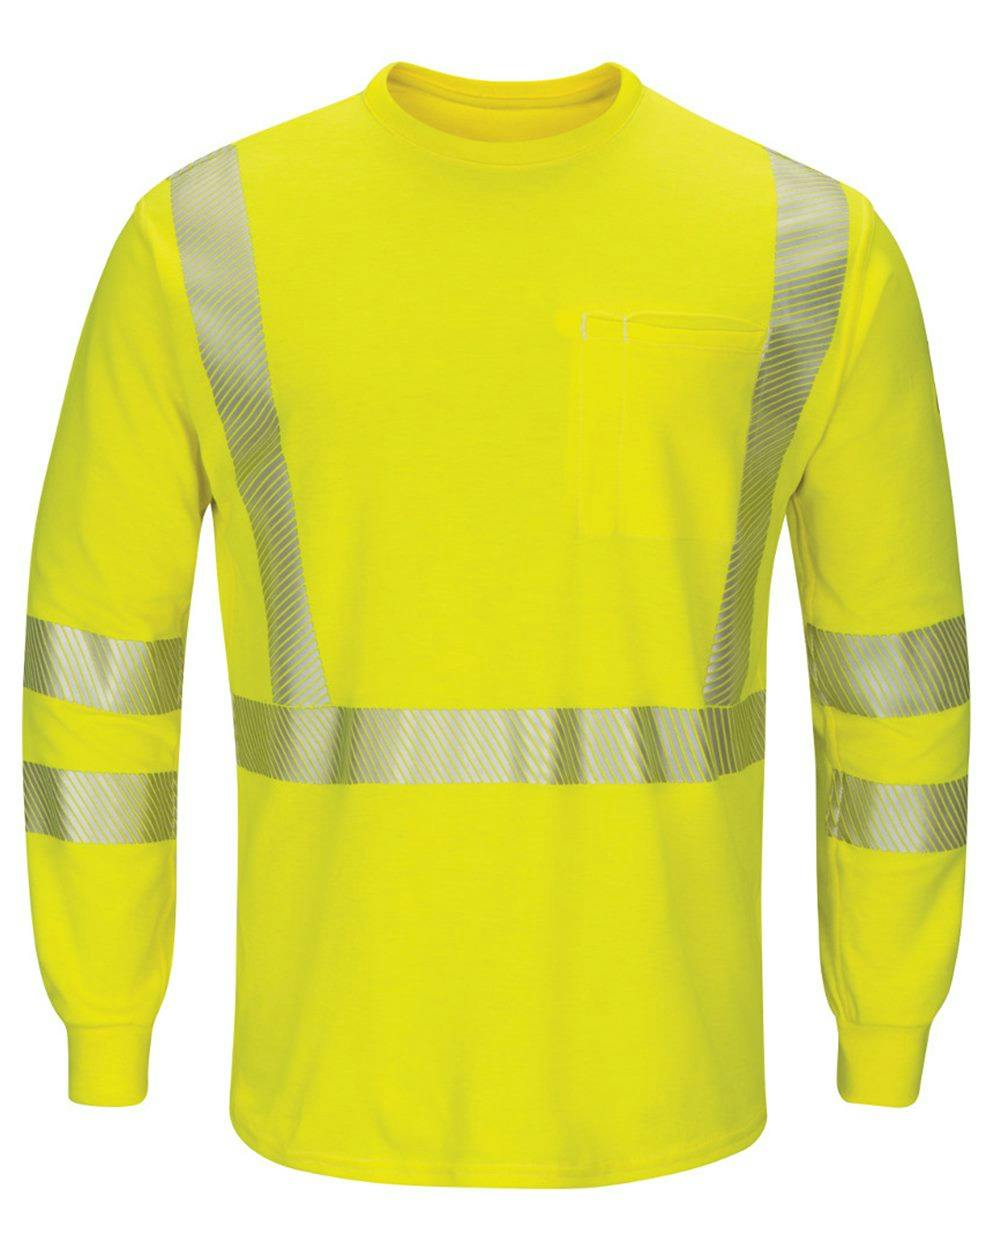 Image for Hi-Visibility Lightweight Long Sleeve T-Shirt - Tall Sizes - SMK8T